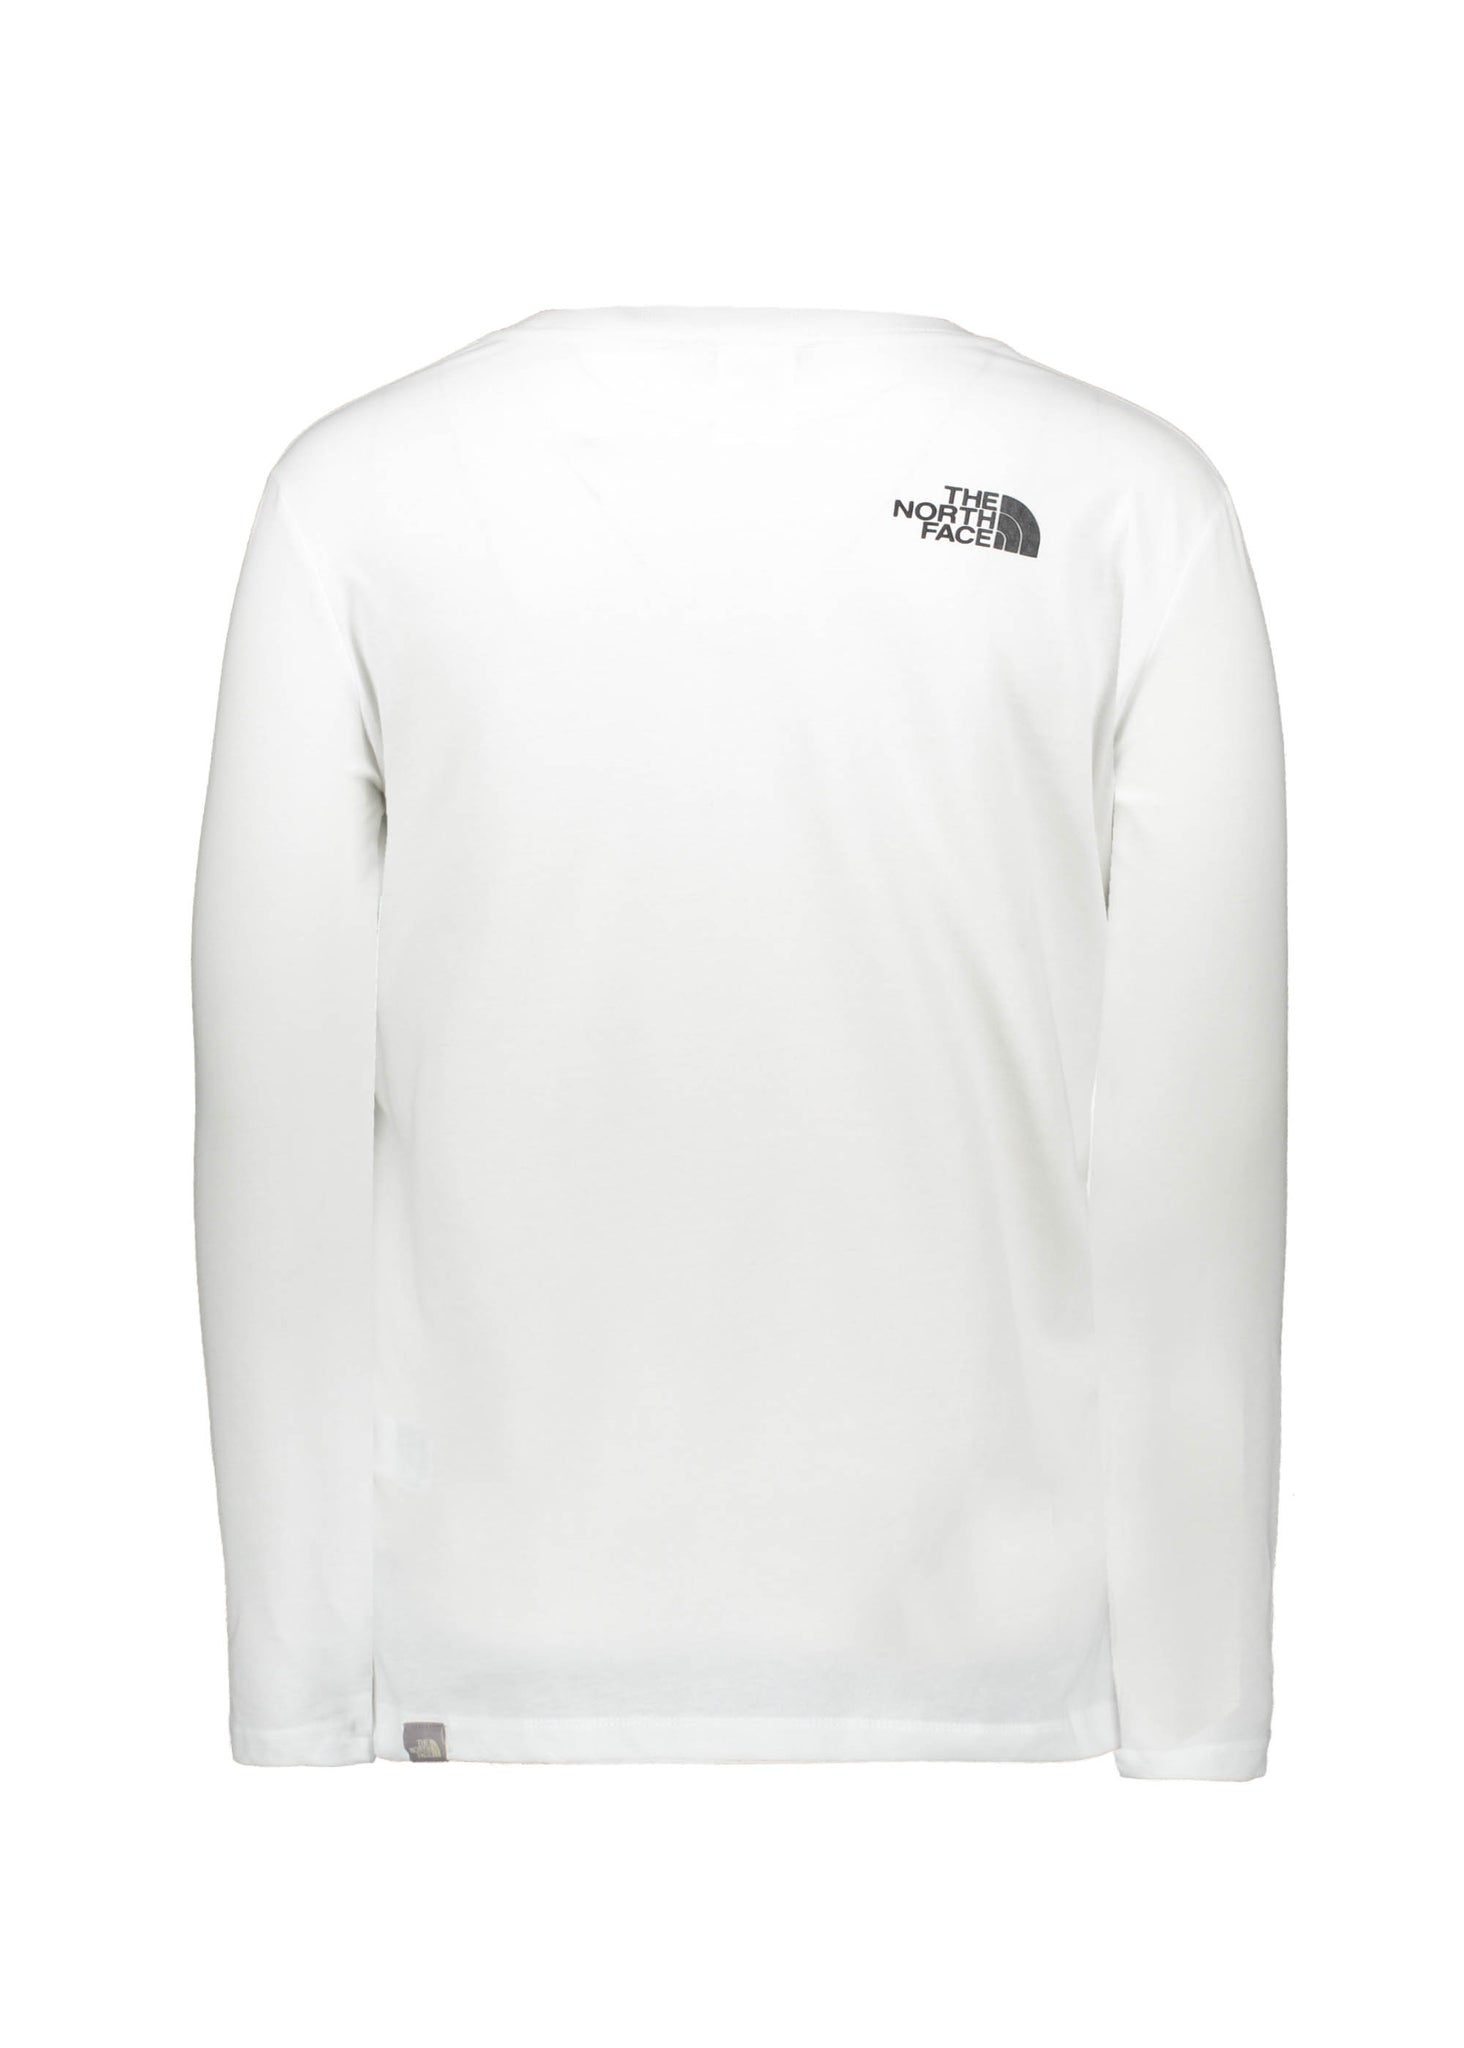 The North Face Standard LS Tee - White